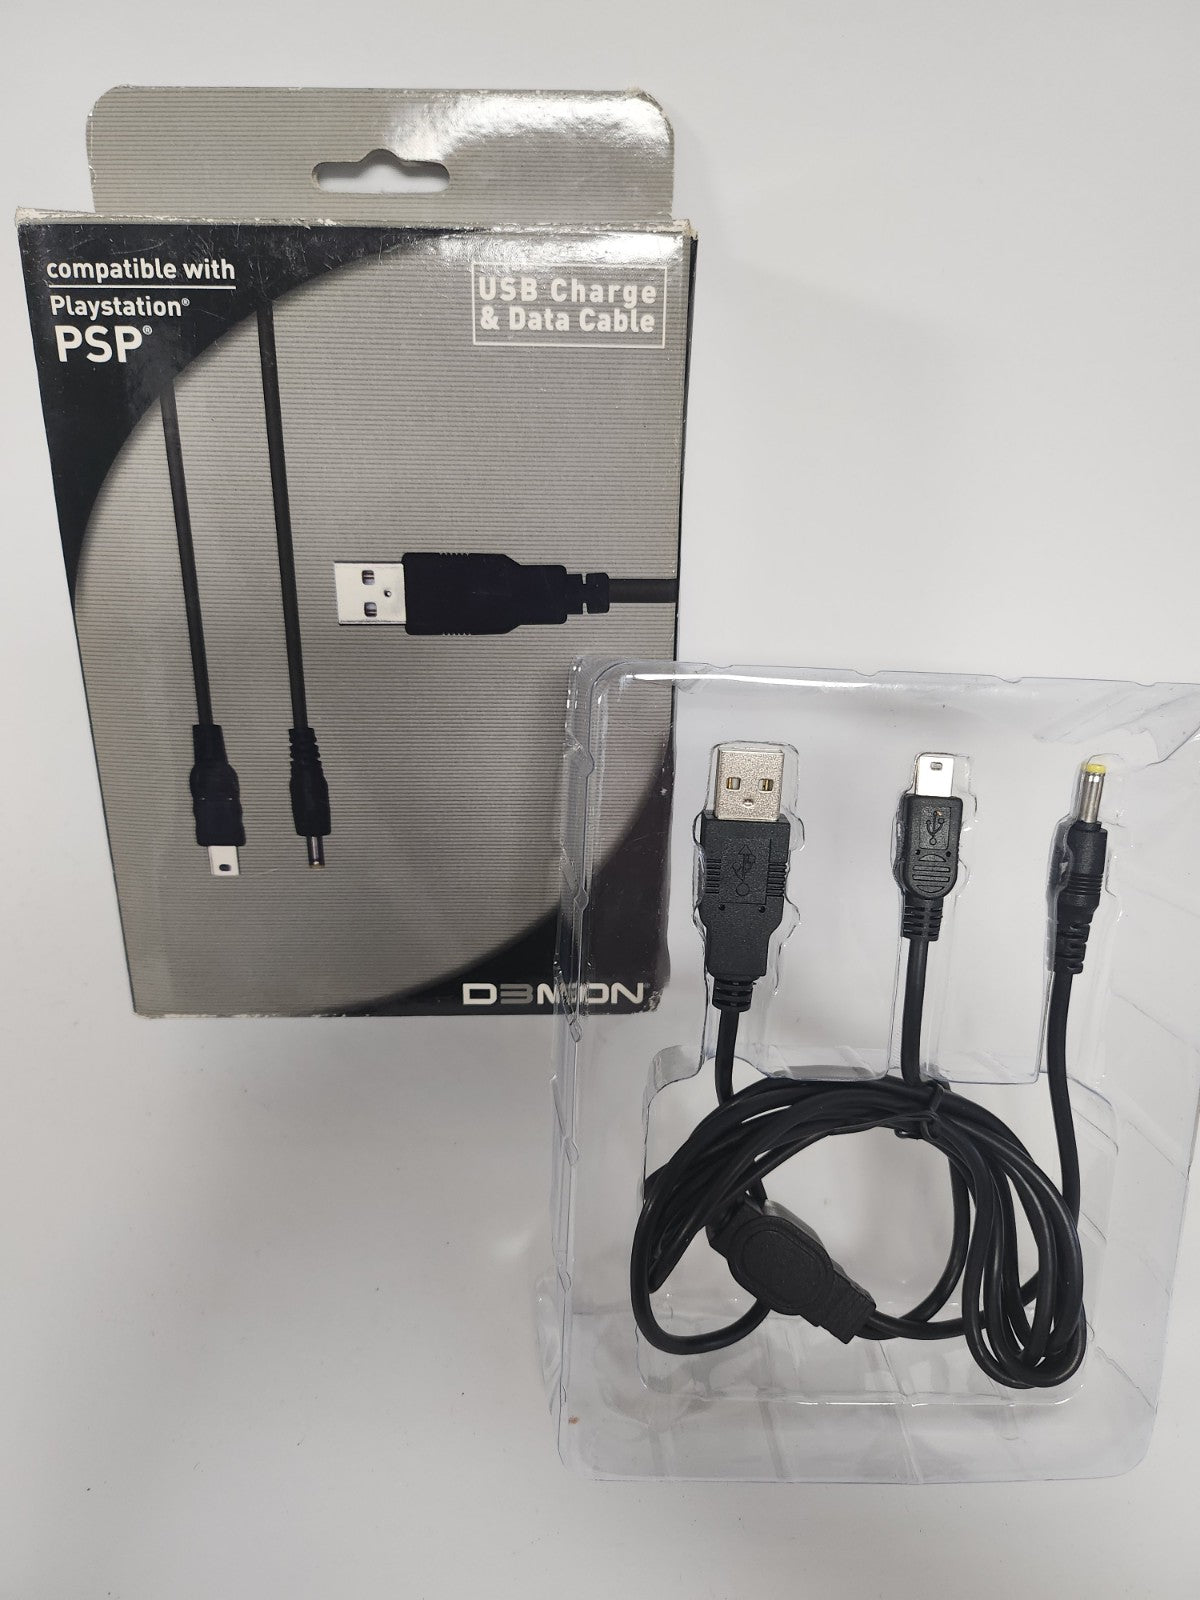 Demon USB Charge & Data Cable Boxed NIeuw Playstation Portable